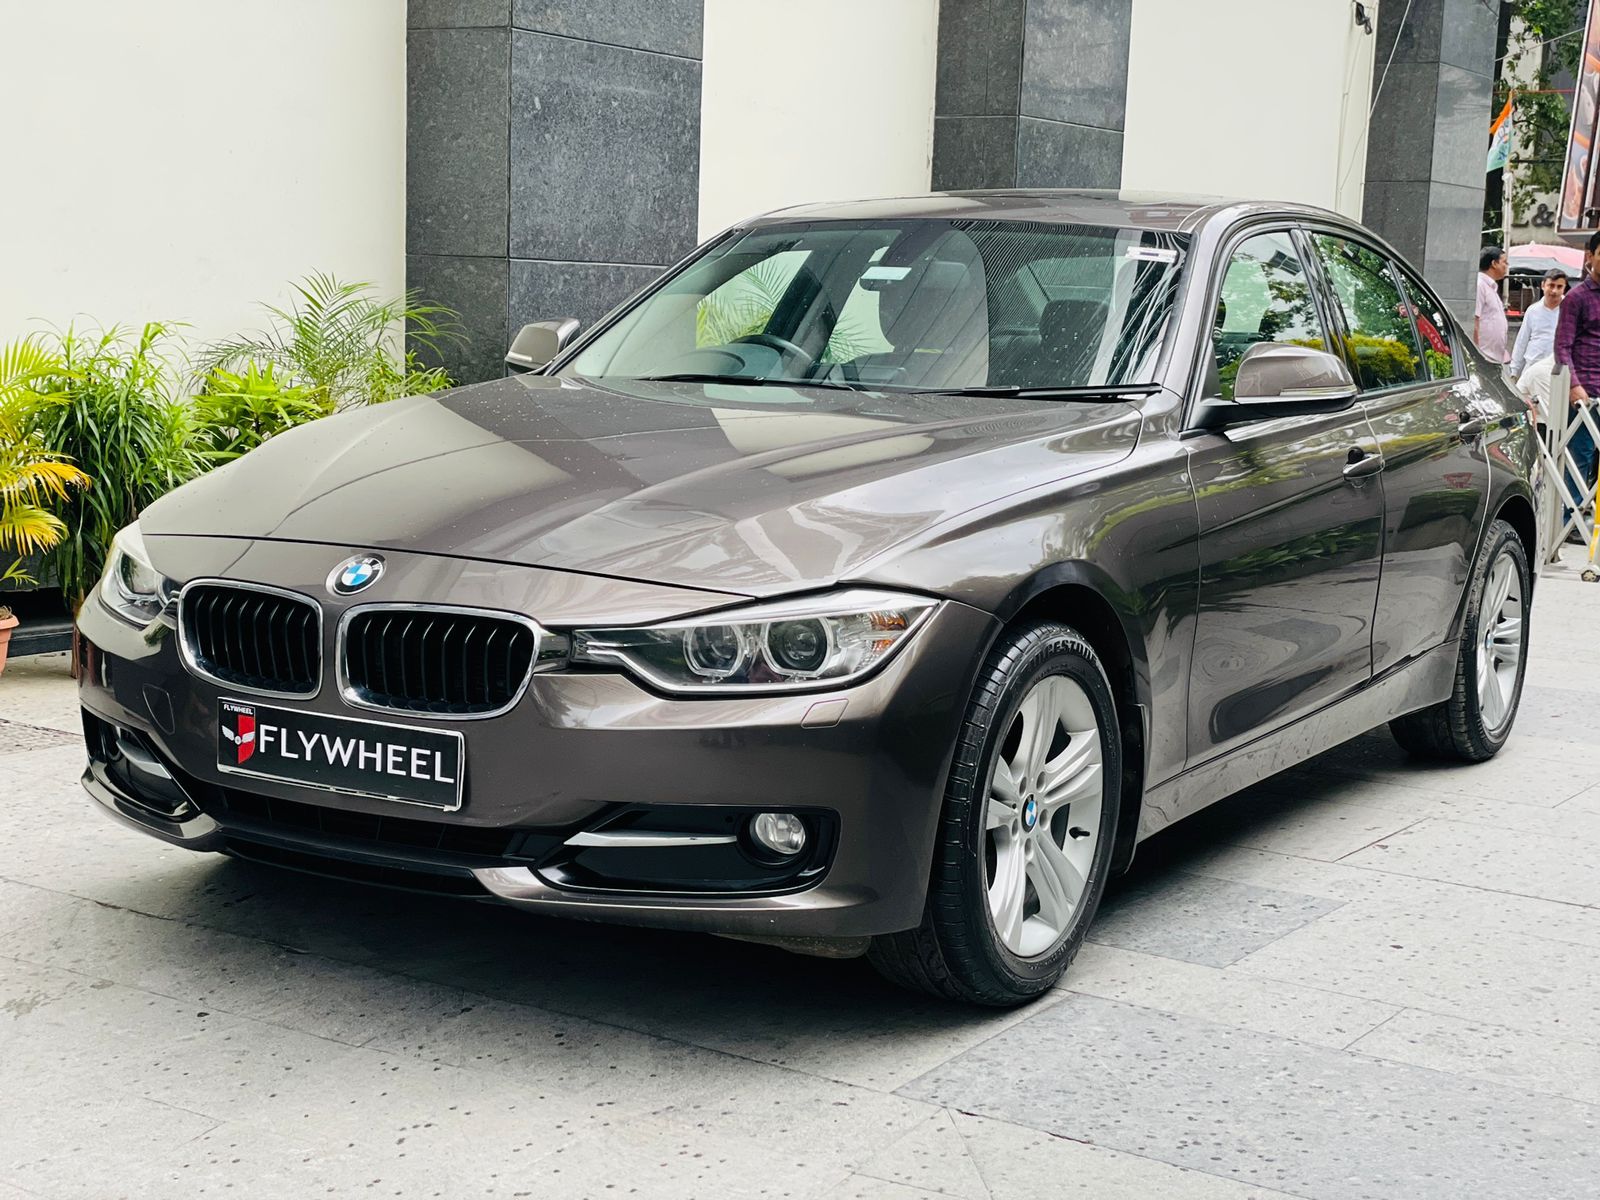 Get Behind the Wheel of the 2013 BMW 320d Sports Line: A Review